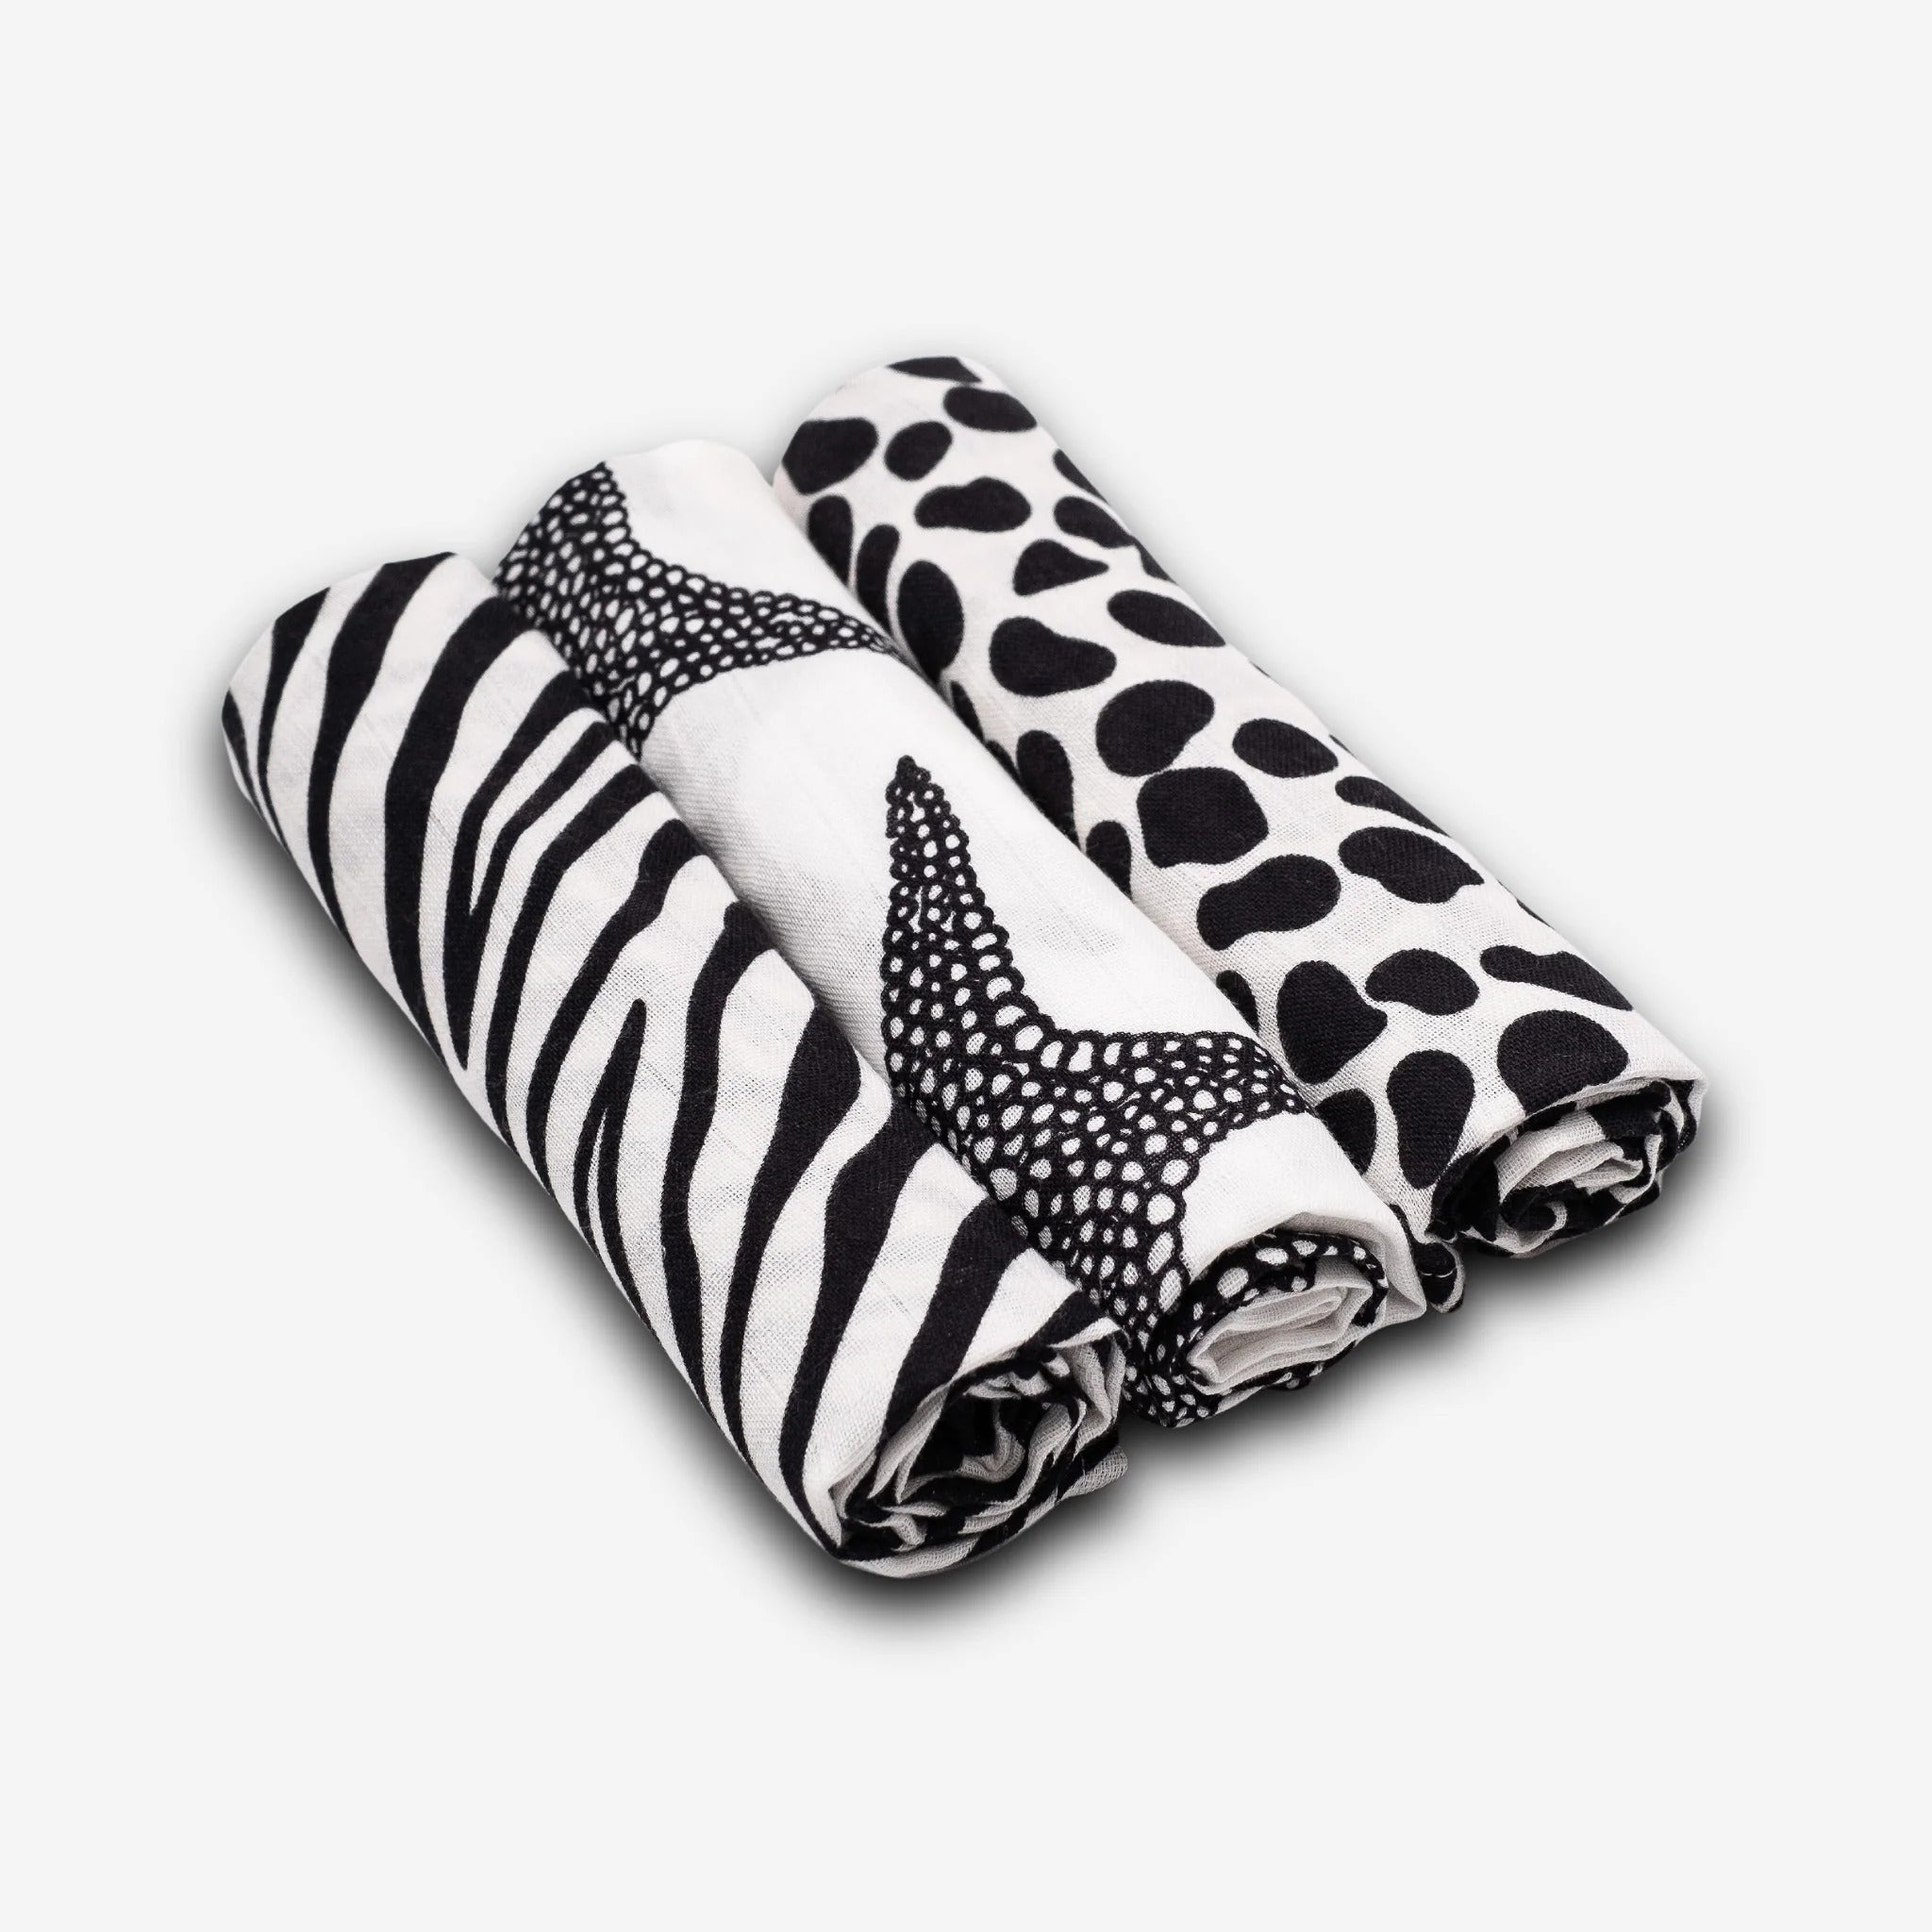 New Baby Gift Set of 3 organic sensory black and white muslins with animal print to help with brain development